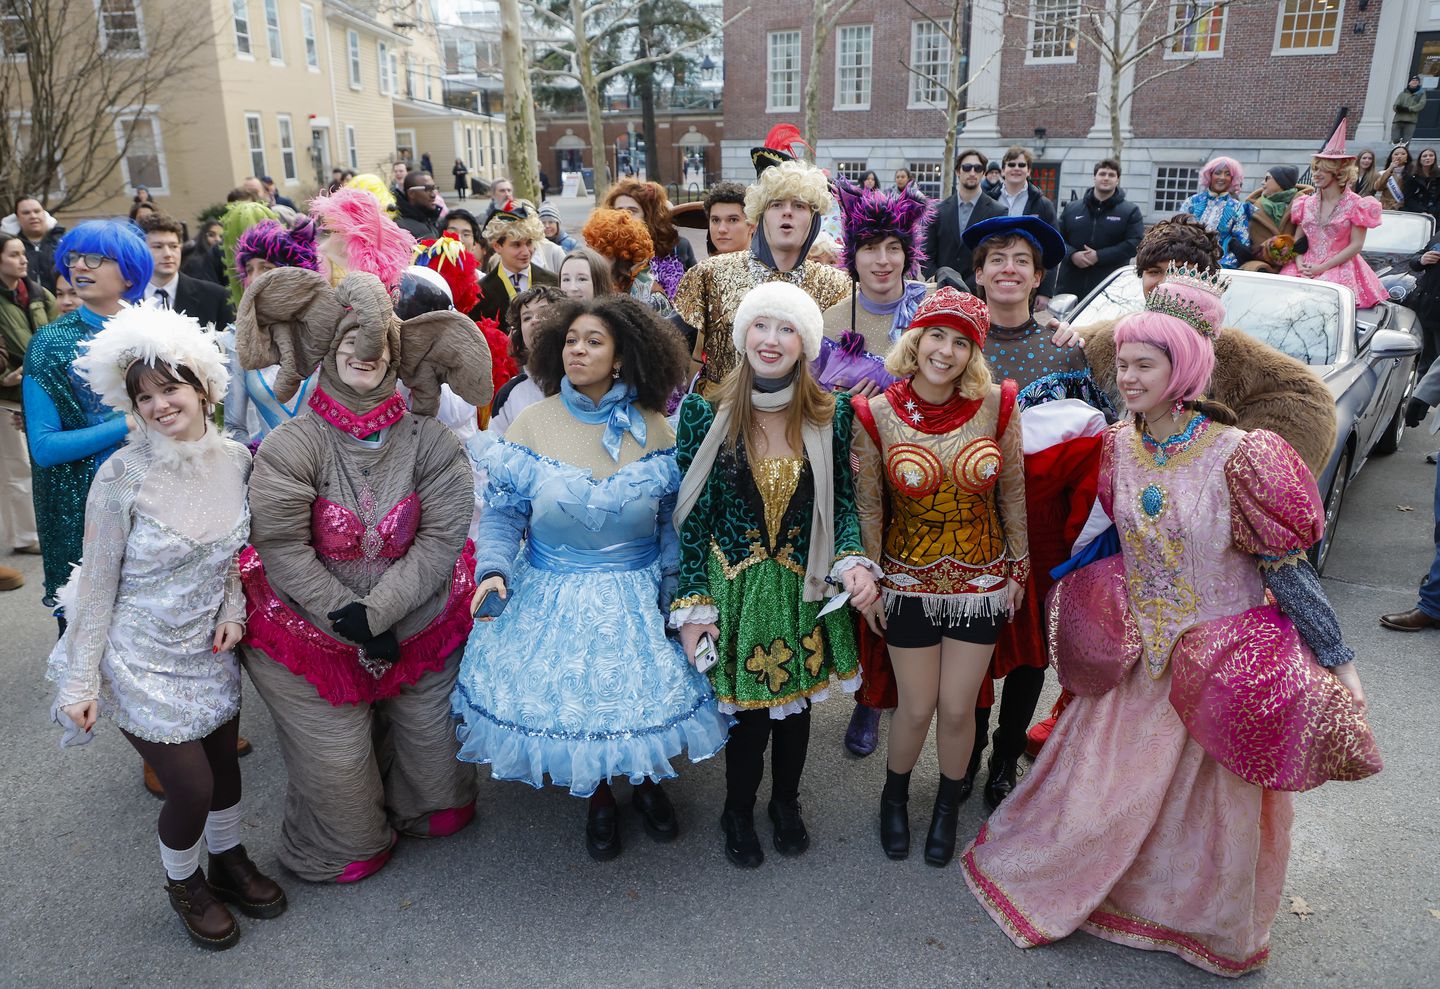 Members of Hasty Pudding Theatricals leading out Annette Bening during the parade for Harvard's Hasty Pudding Woman of the Year on Tuesday.

